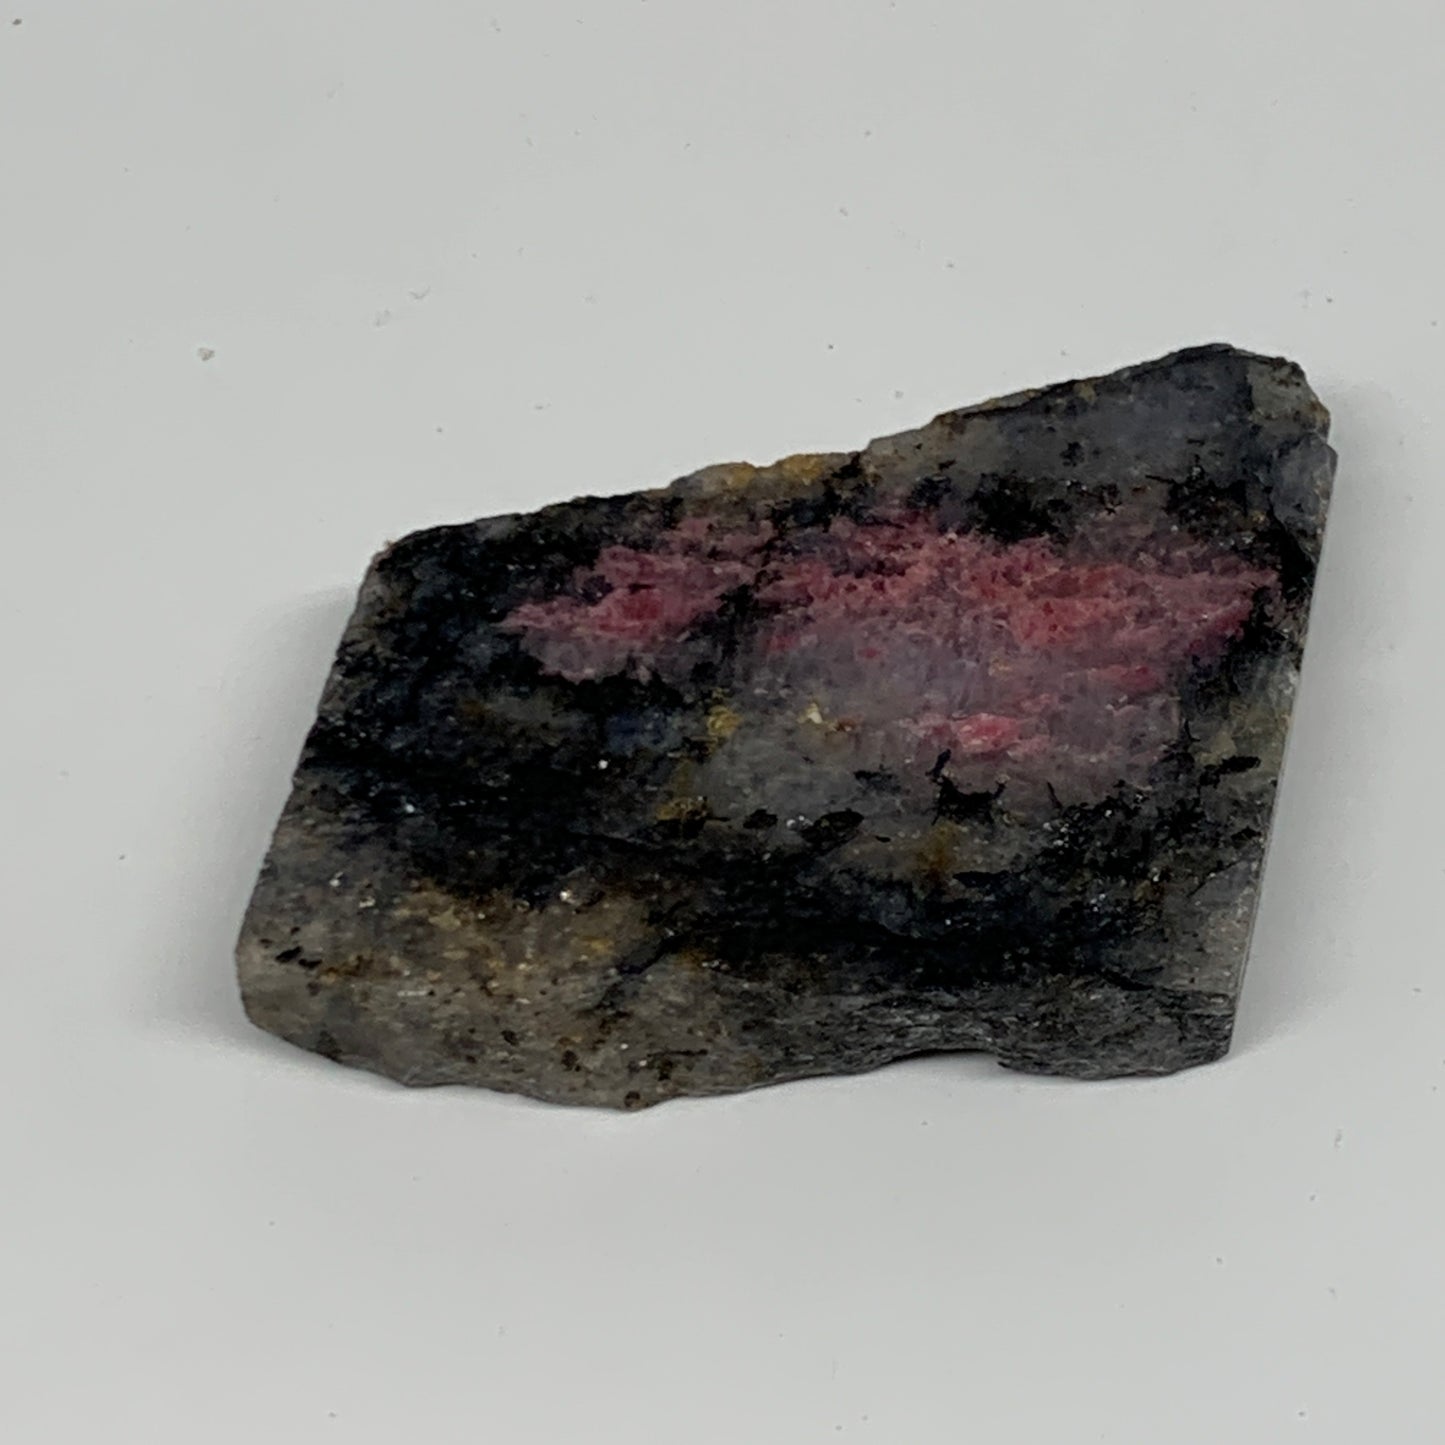 74.9g, 2.3"x1.9"x0.5", One face polished Rhodonite, One face semi polished, B160